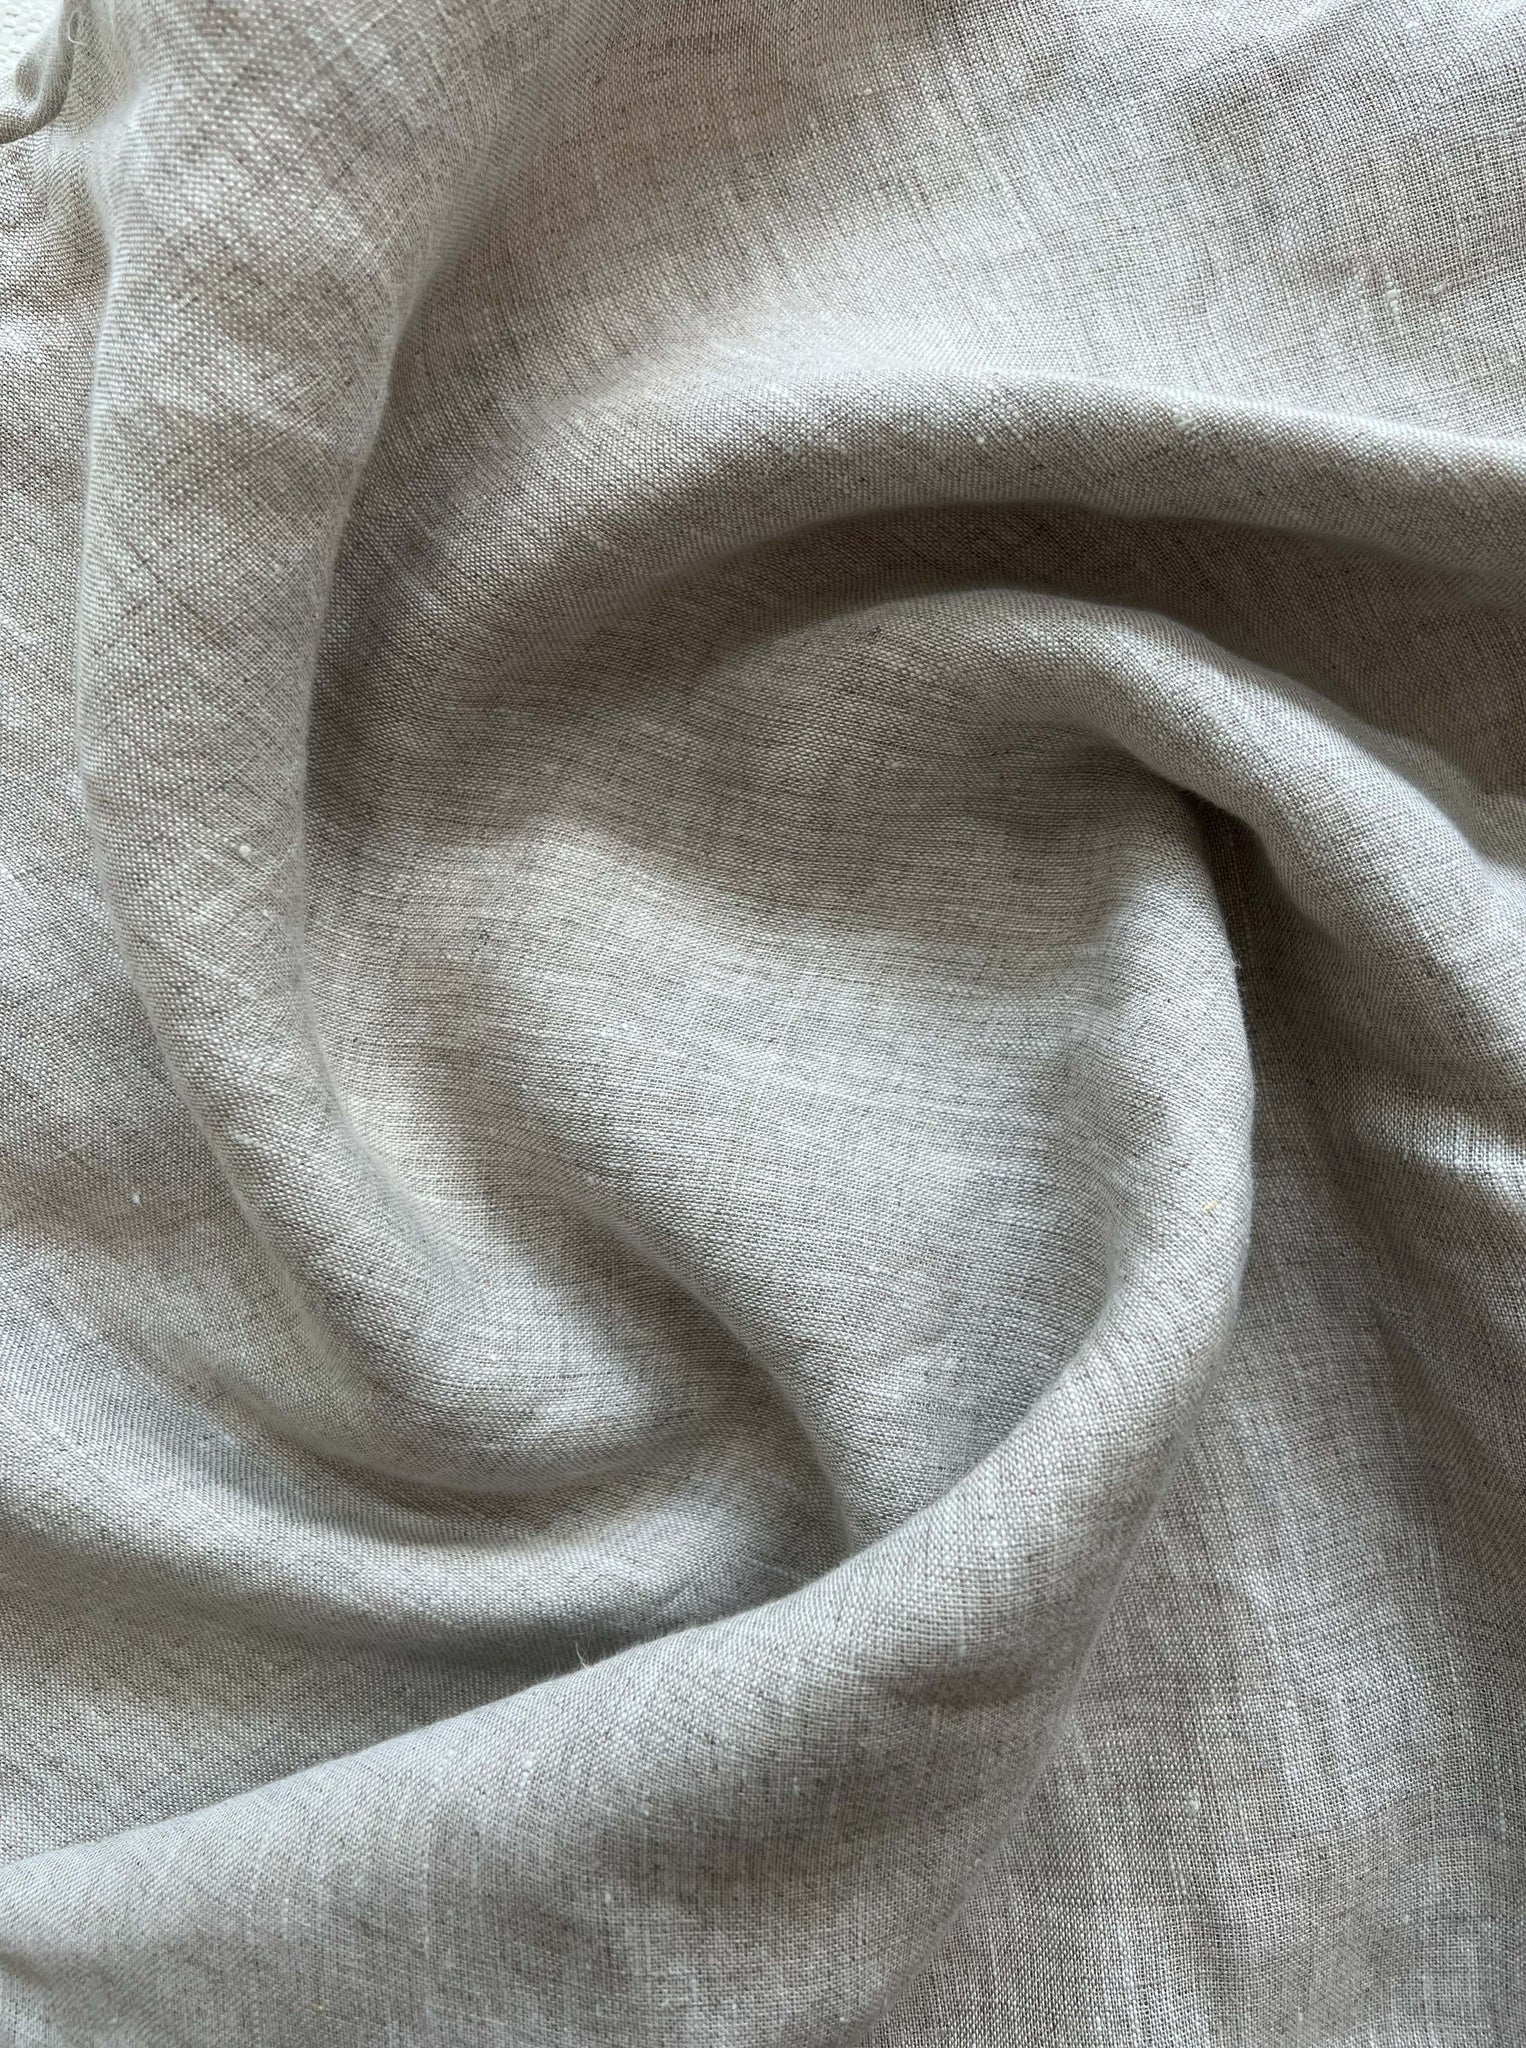 A close up image of an Everyday Top - Natural Linen fabric.